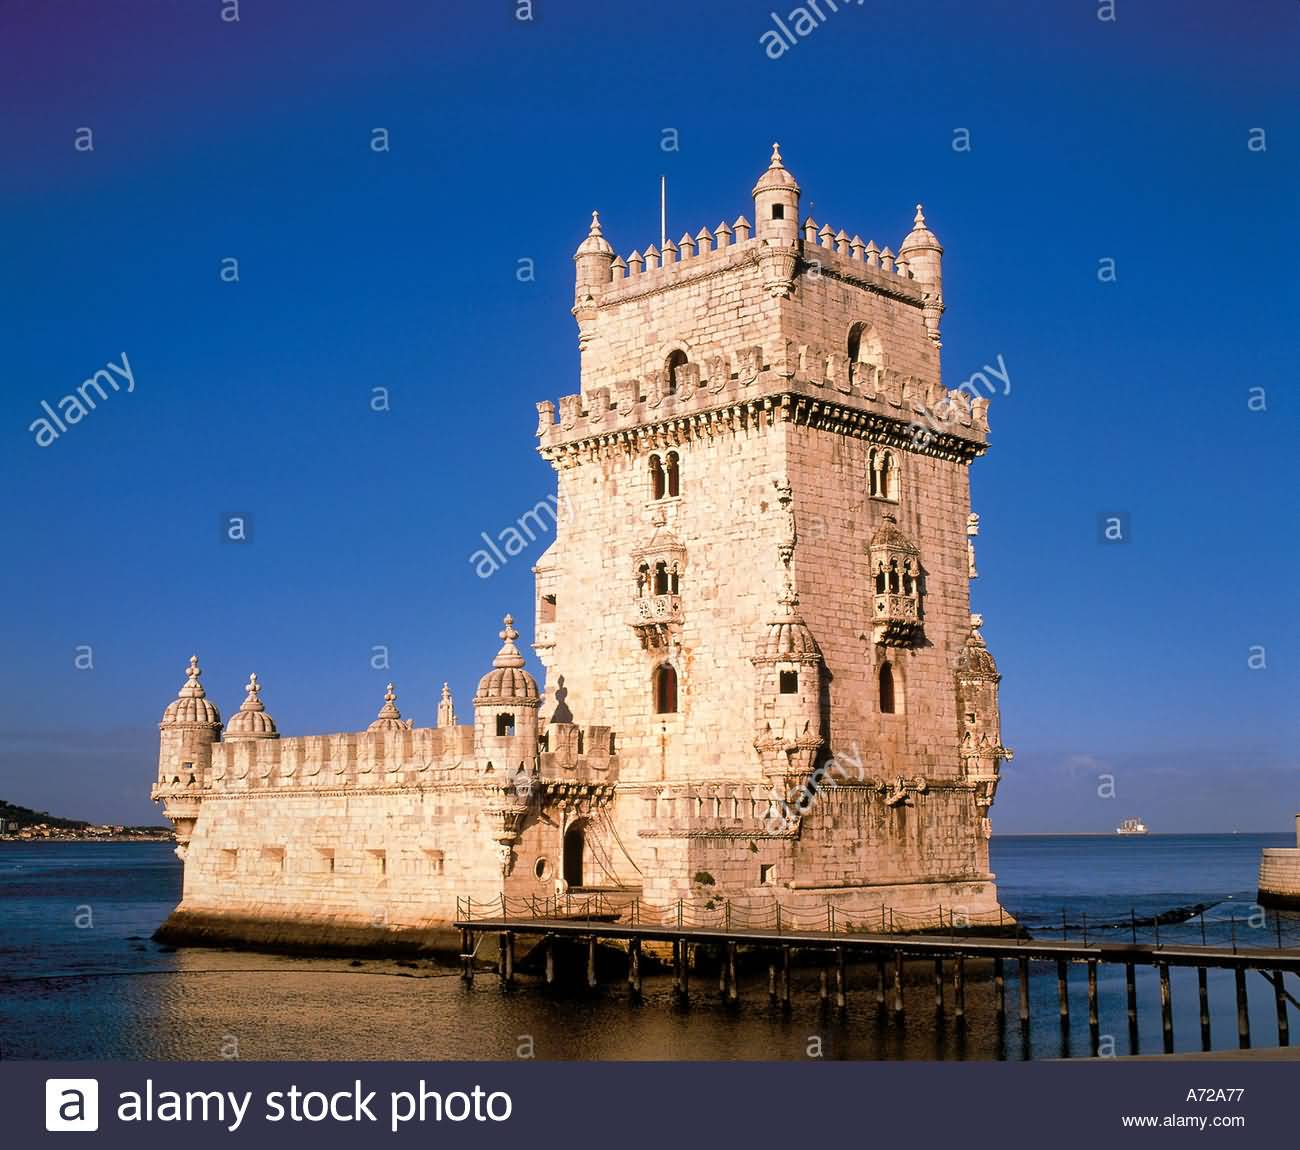 Belem Tower On The Tagus River In Lisbon, Portugal